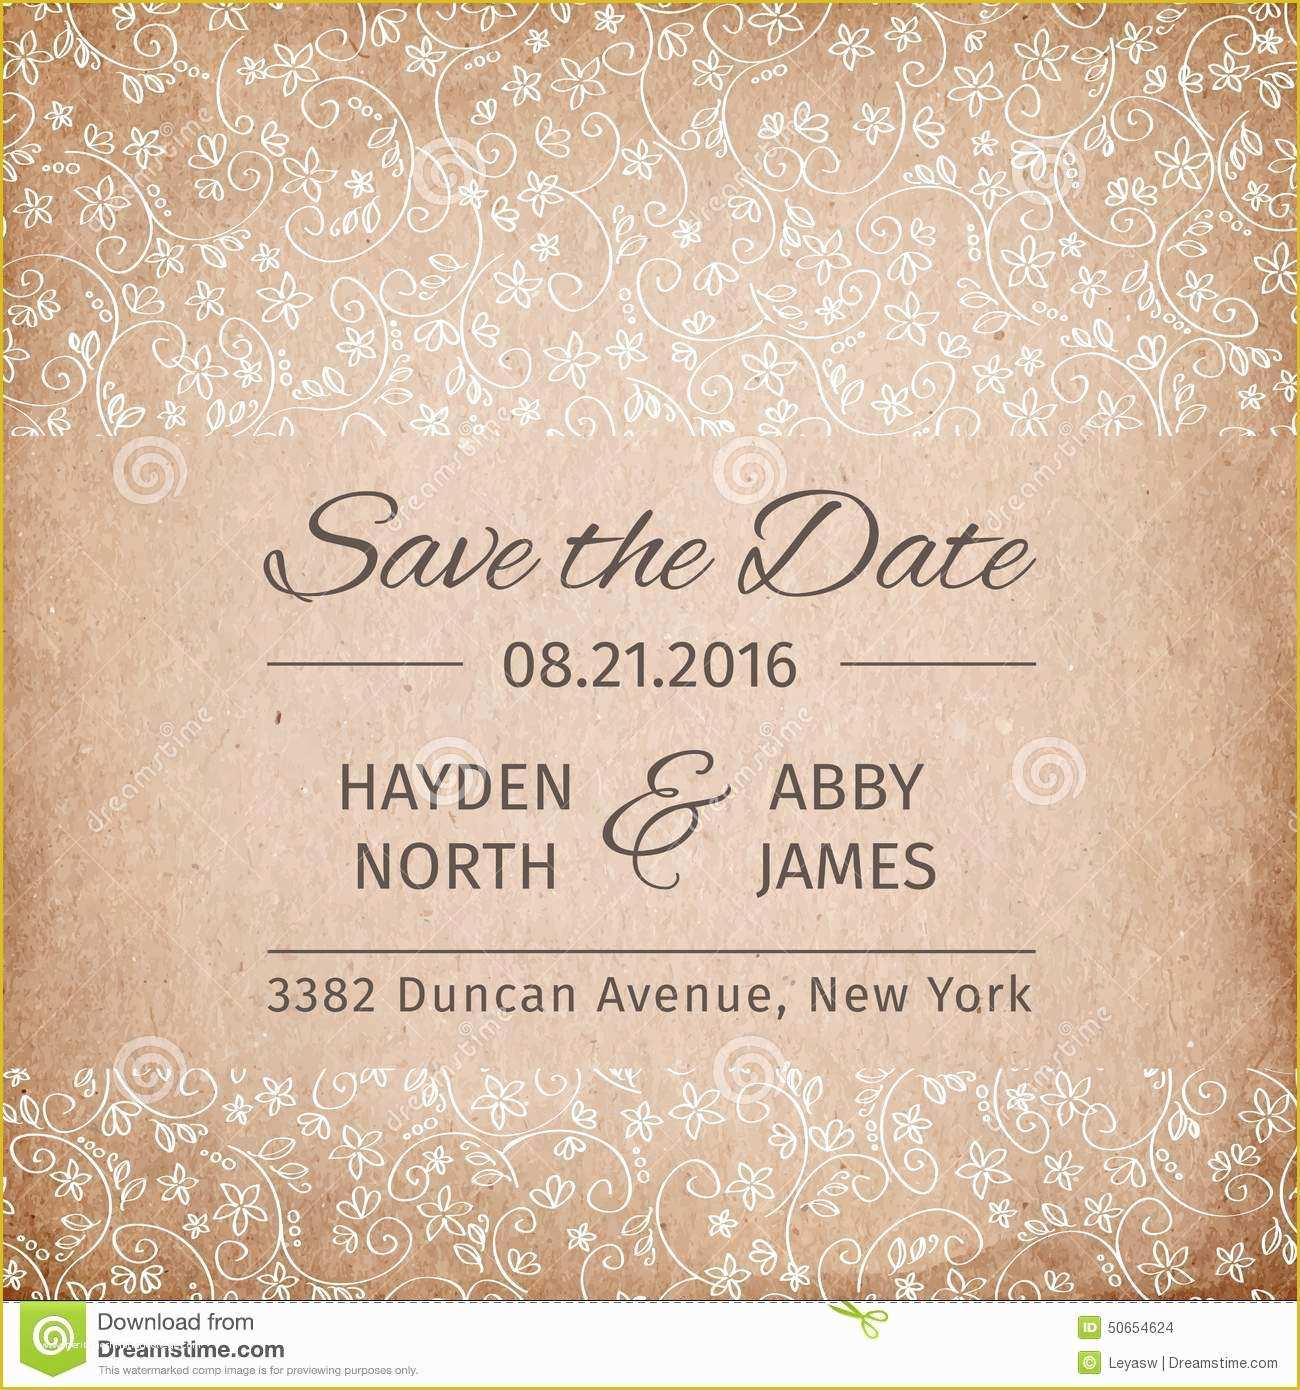 Save the Date Invitation Templates Free Of Save the Date Wedding Invitation Template Vintage Paper